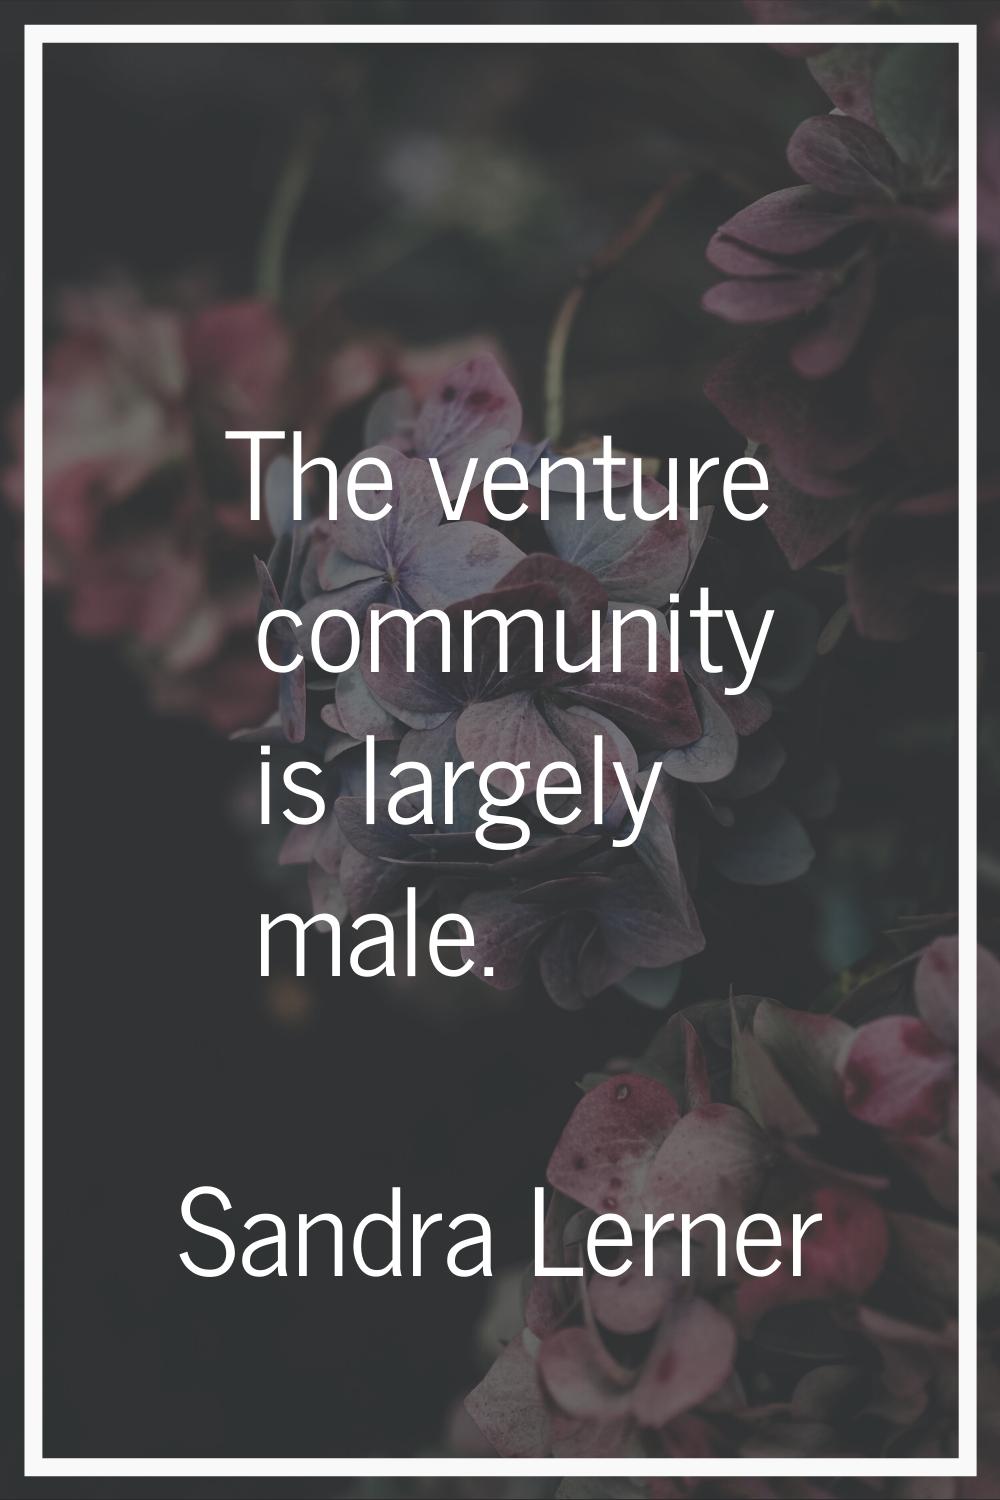 The venture community is largely male.